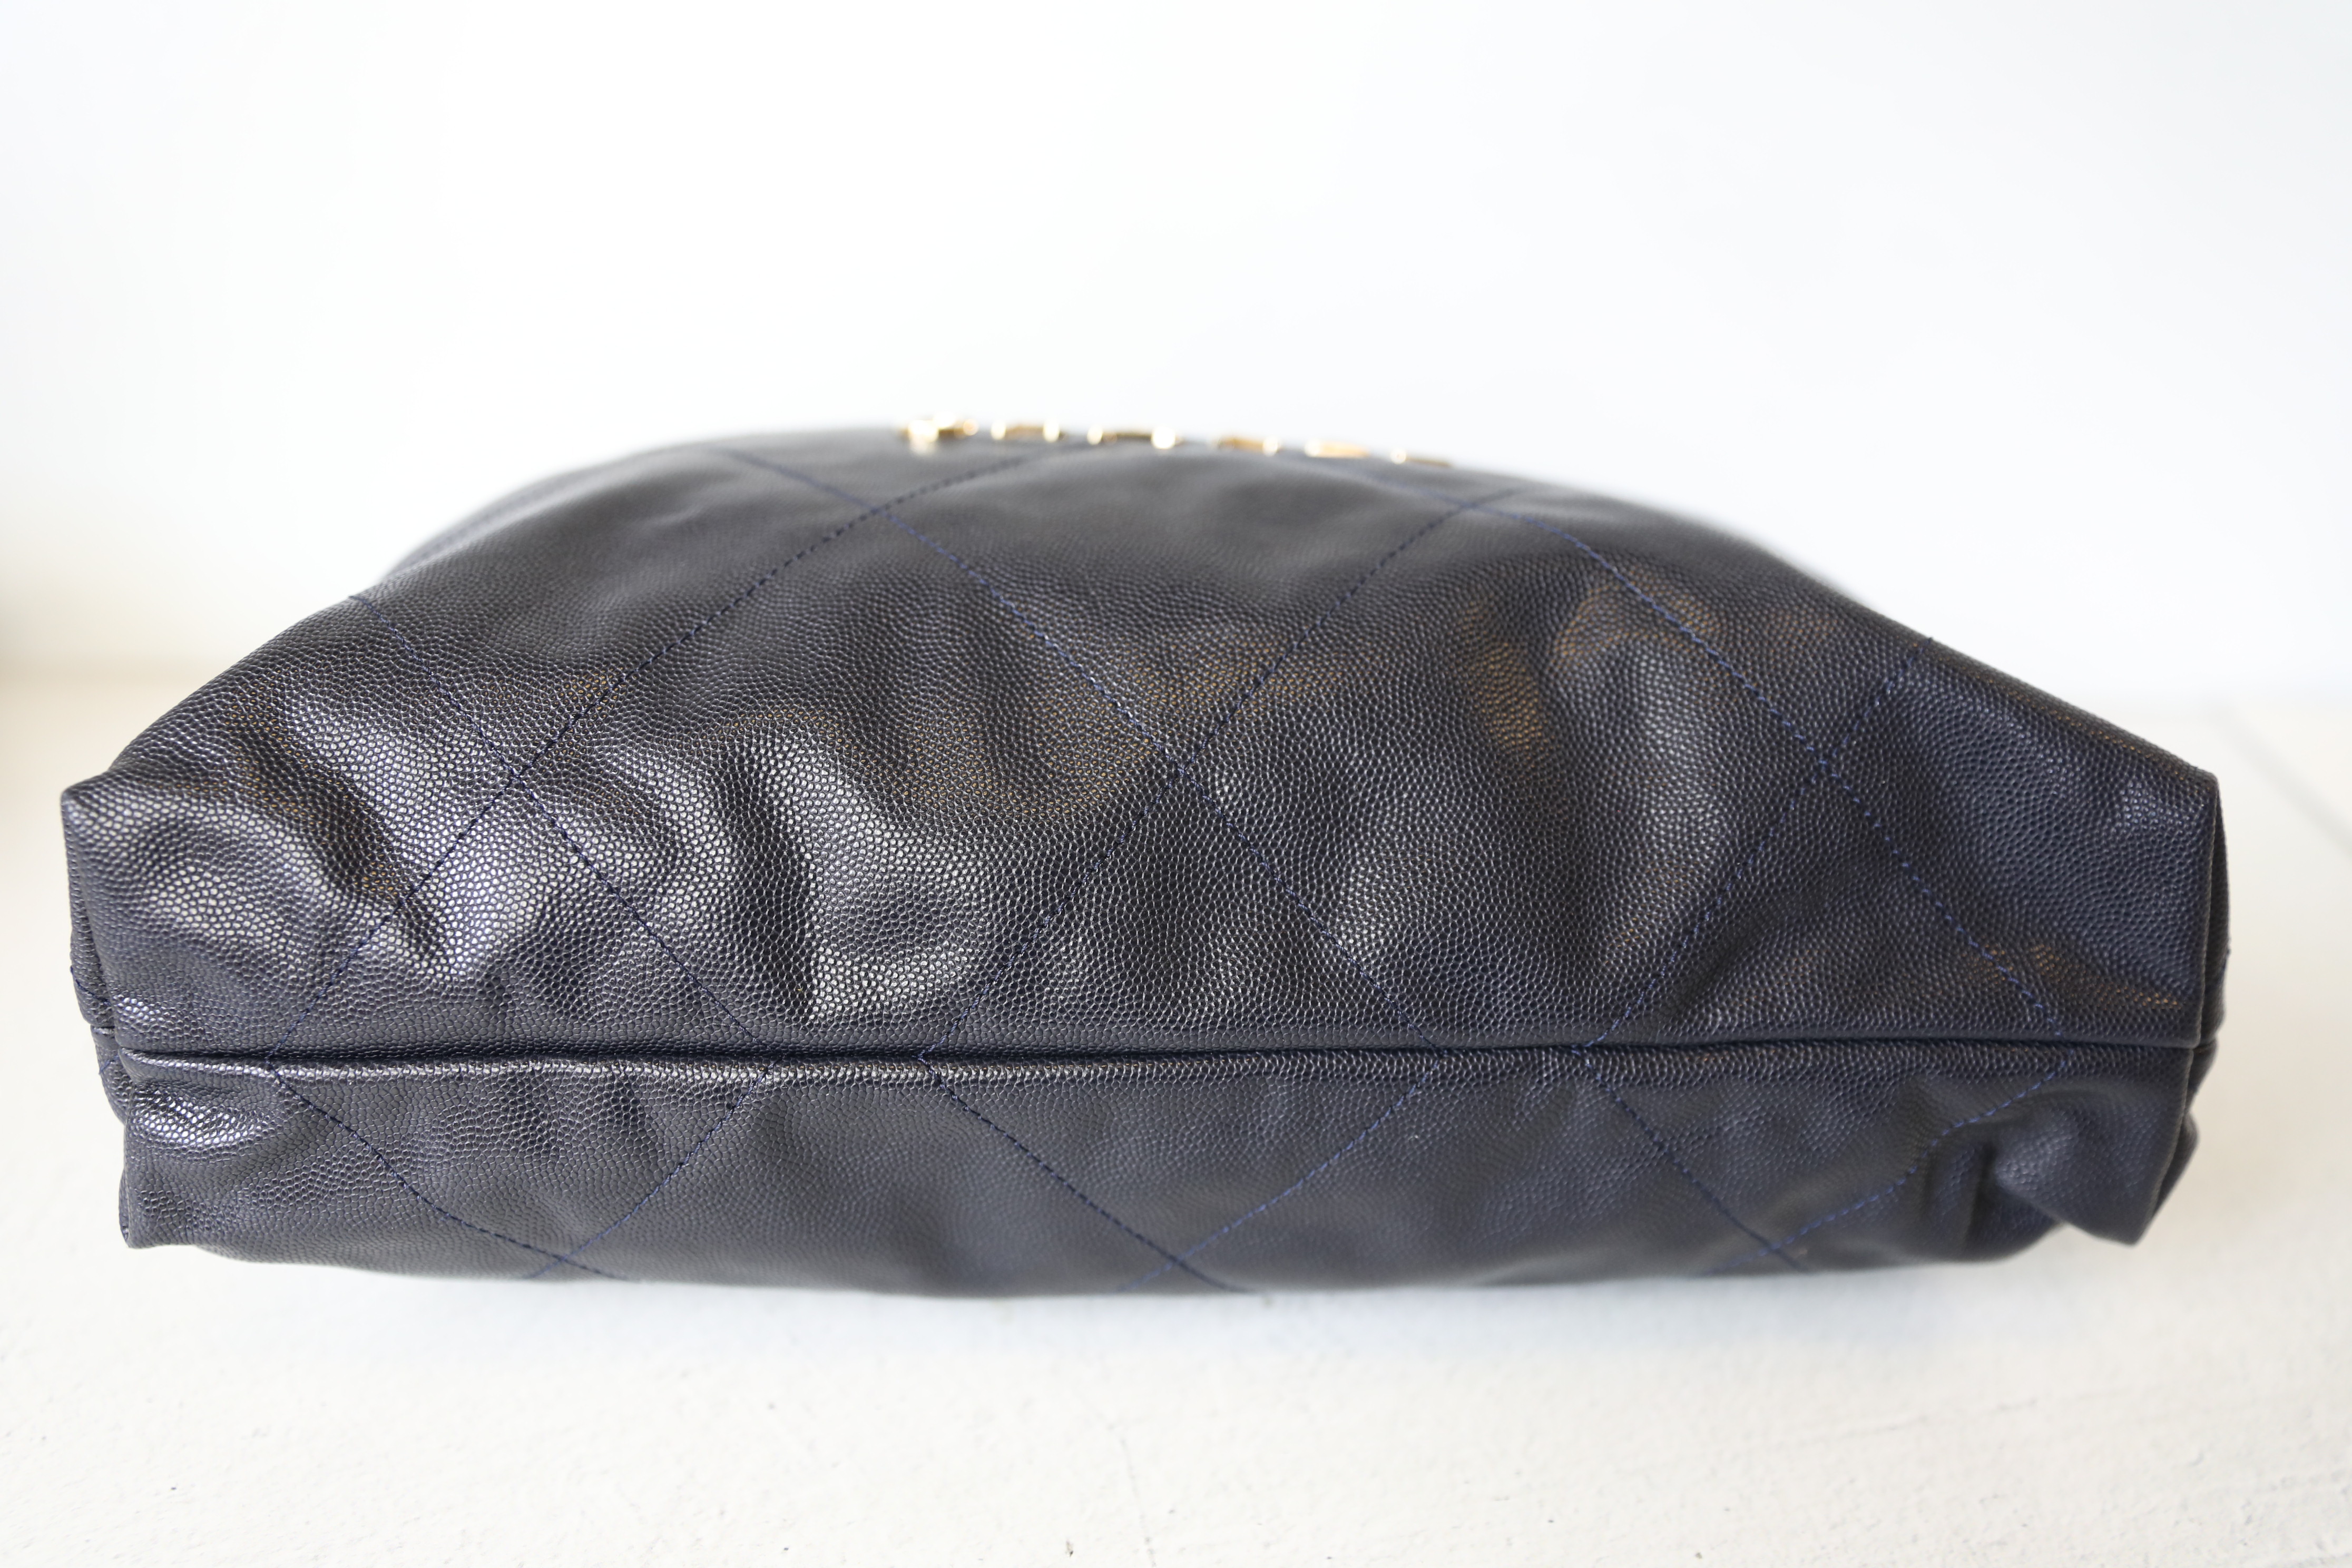 Chanel 22 Medium, Navy Caviar Leather, Gold Hardware, Preowned in